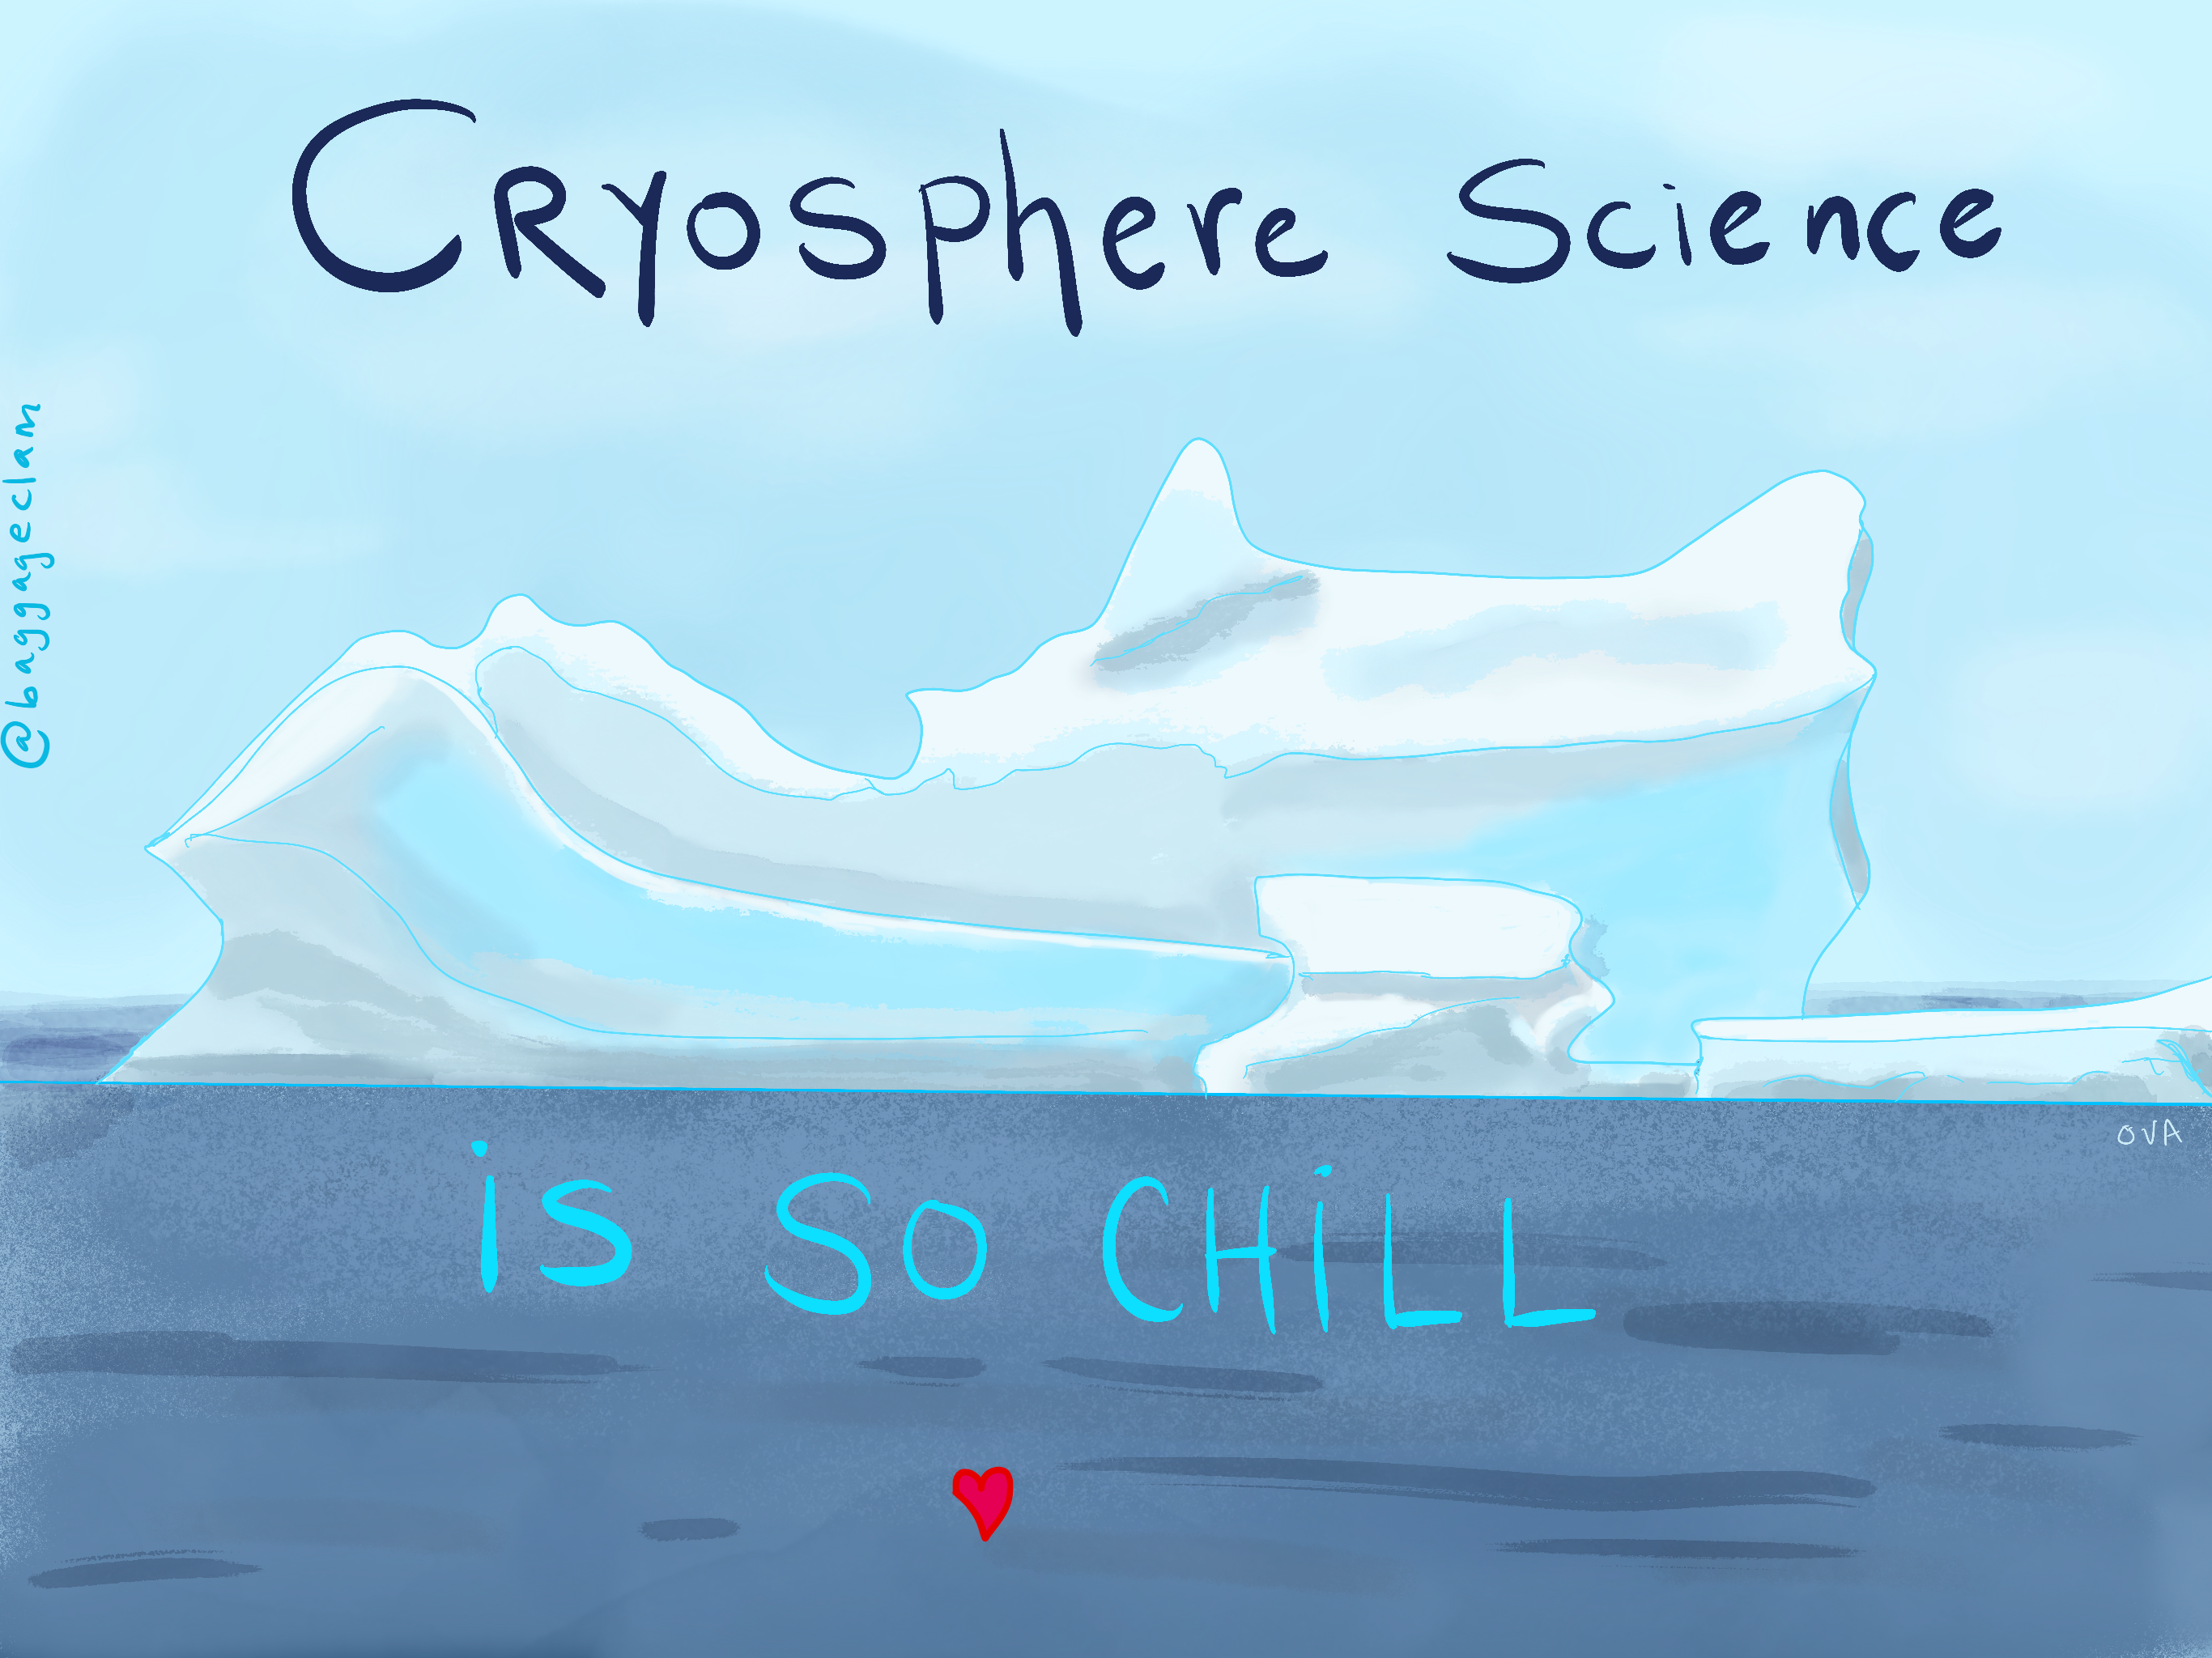 Cryosphere - so chill